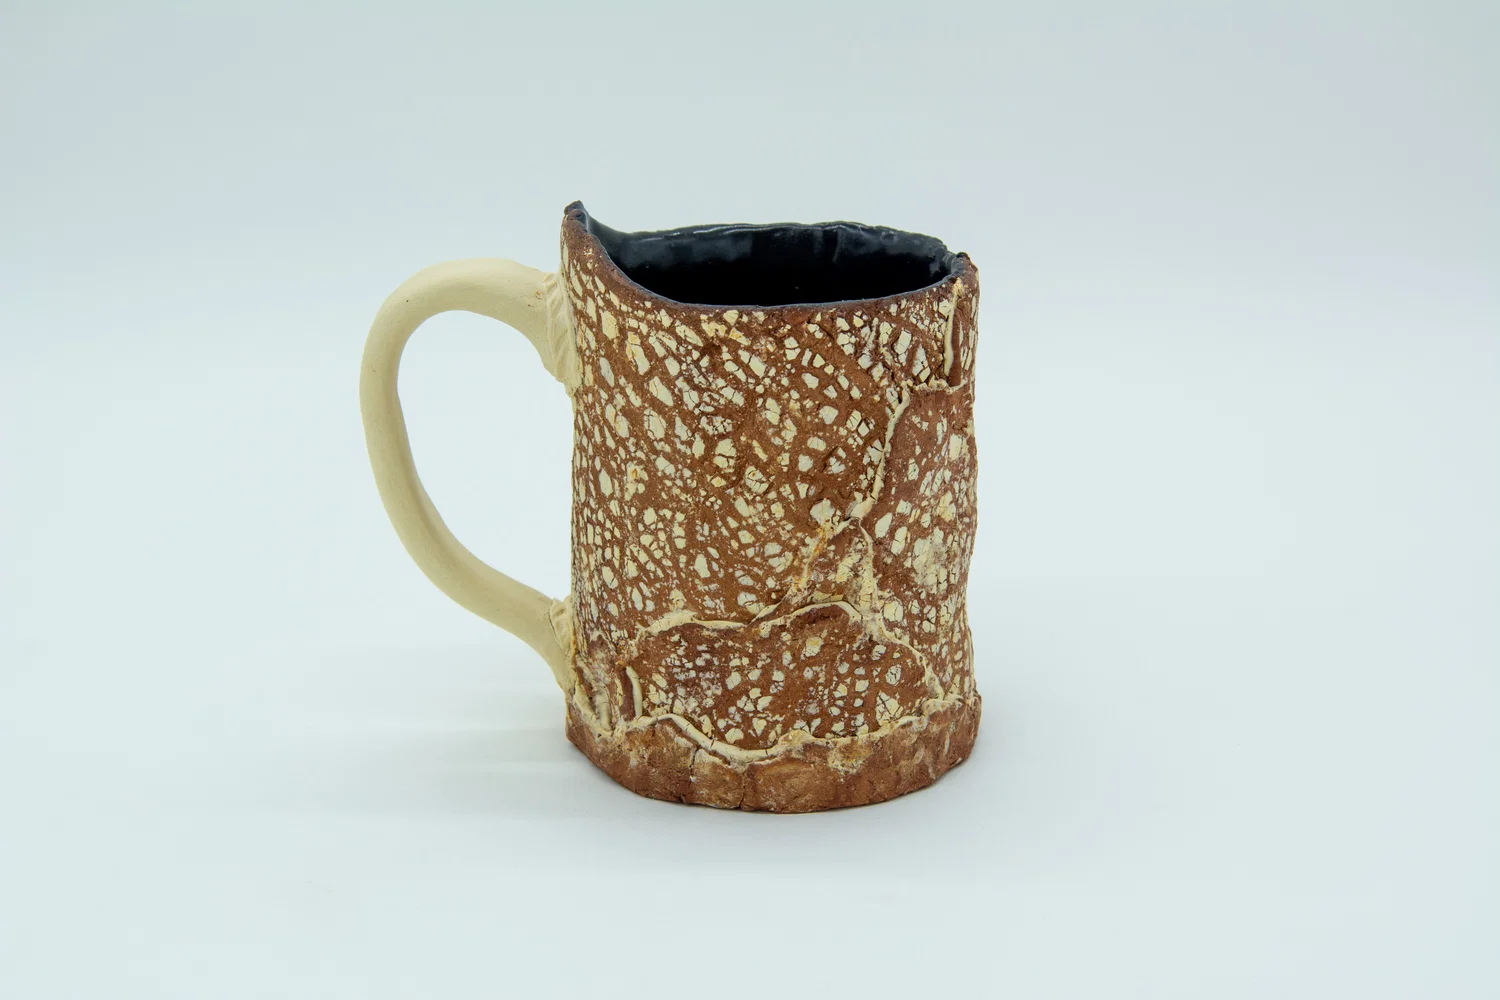 A handbuilt ceramic mug made of red and brown clay marbled together; It has a dry lake bed texture with the raised areas being a white clay. It’s made of different pieces of clay, making the marbling and texture inconsistent. White clay also fills the seams between the pieces, no effort was made to hide the seams. The interior of the mug is glazed black, and the handle is made of the same white clay that’s used in the seams.